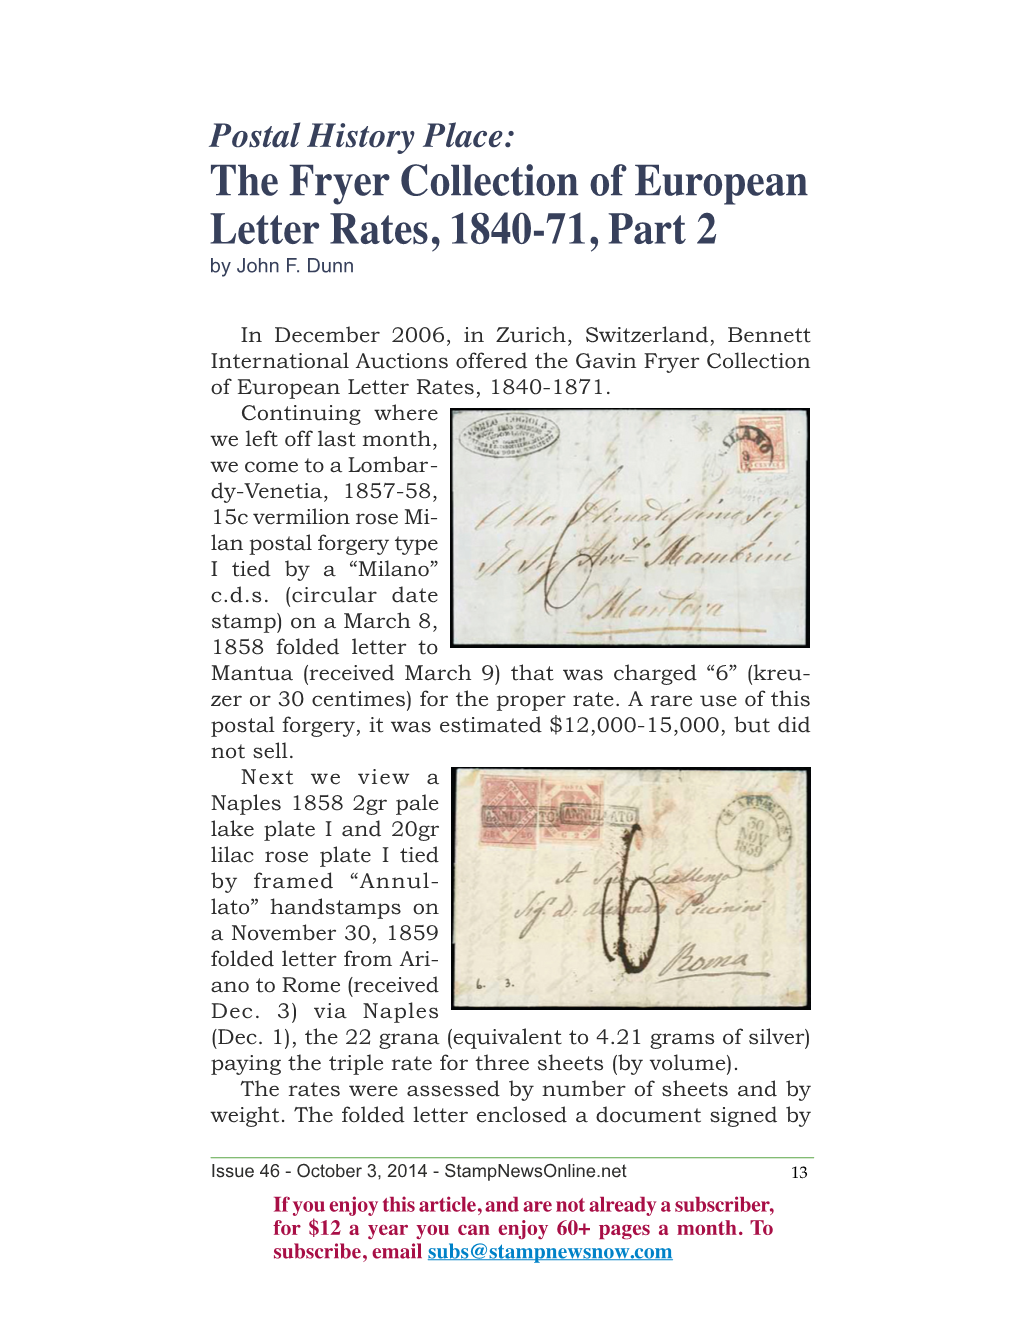 The Fryer Collection of European Letter Rates, 1840-71, Part 2 by John F